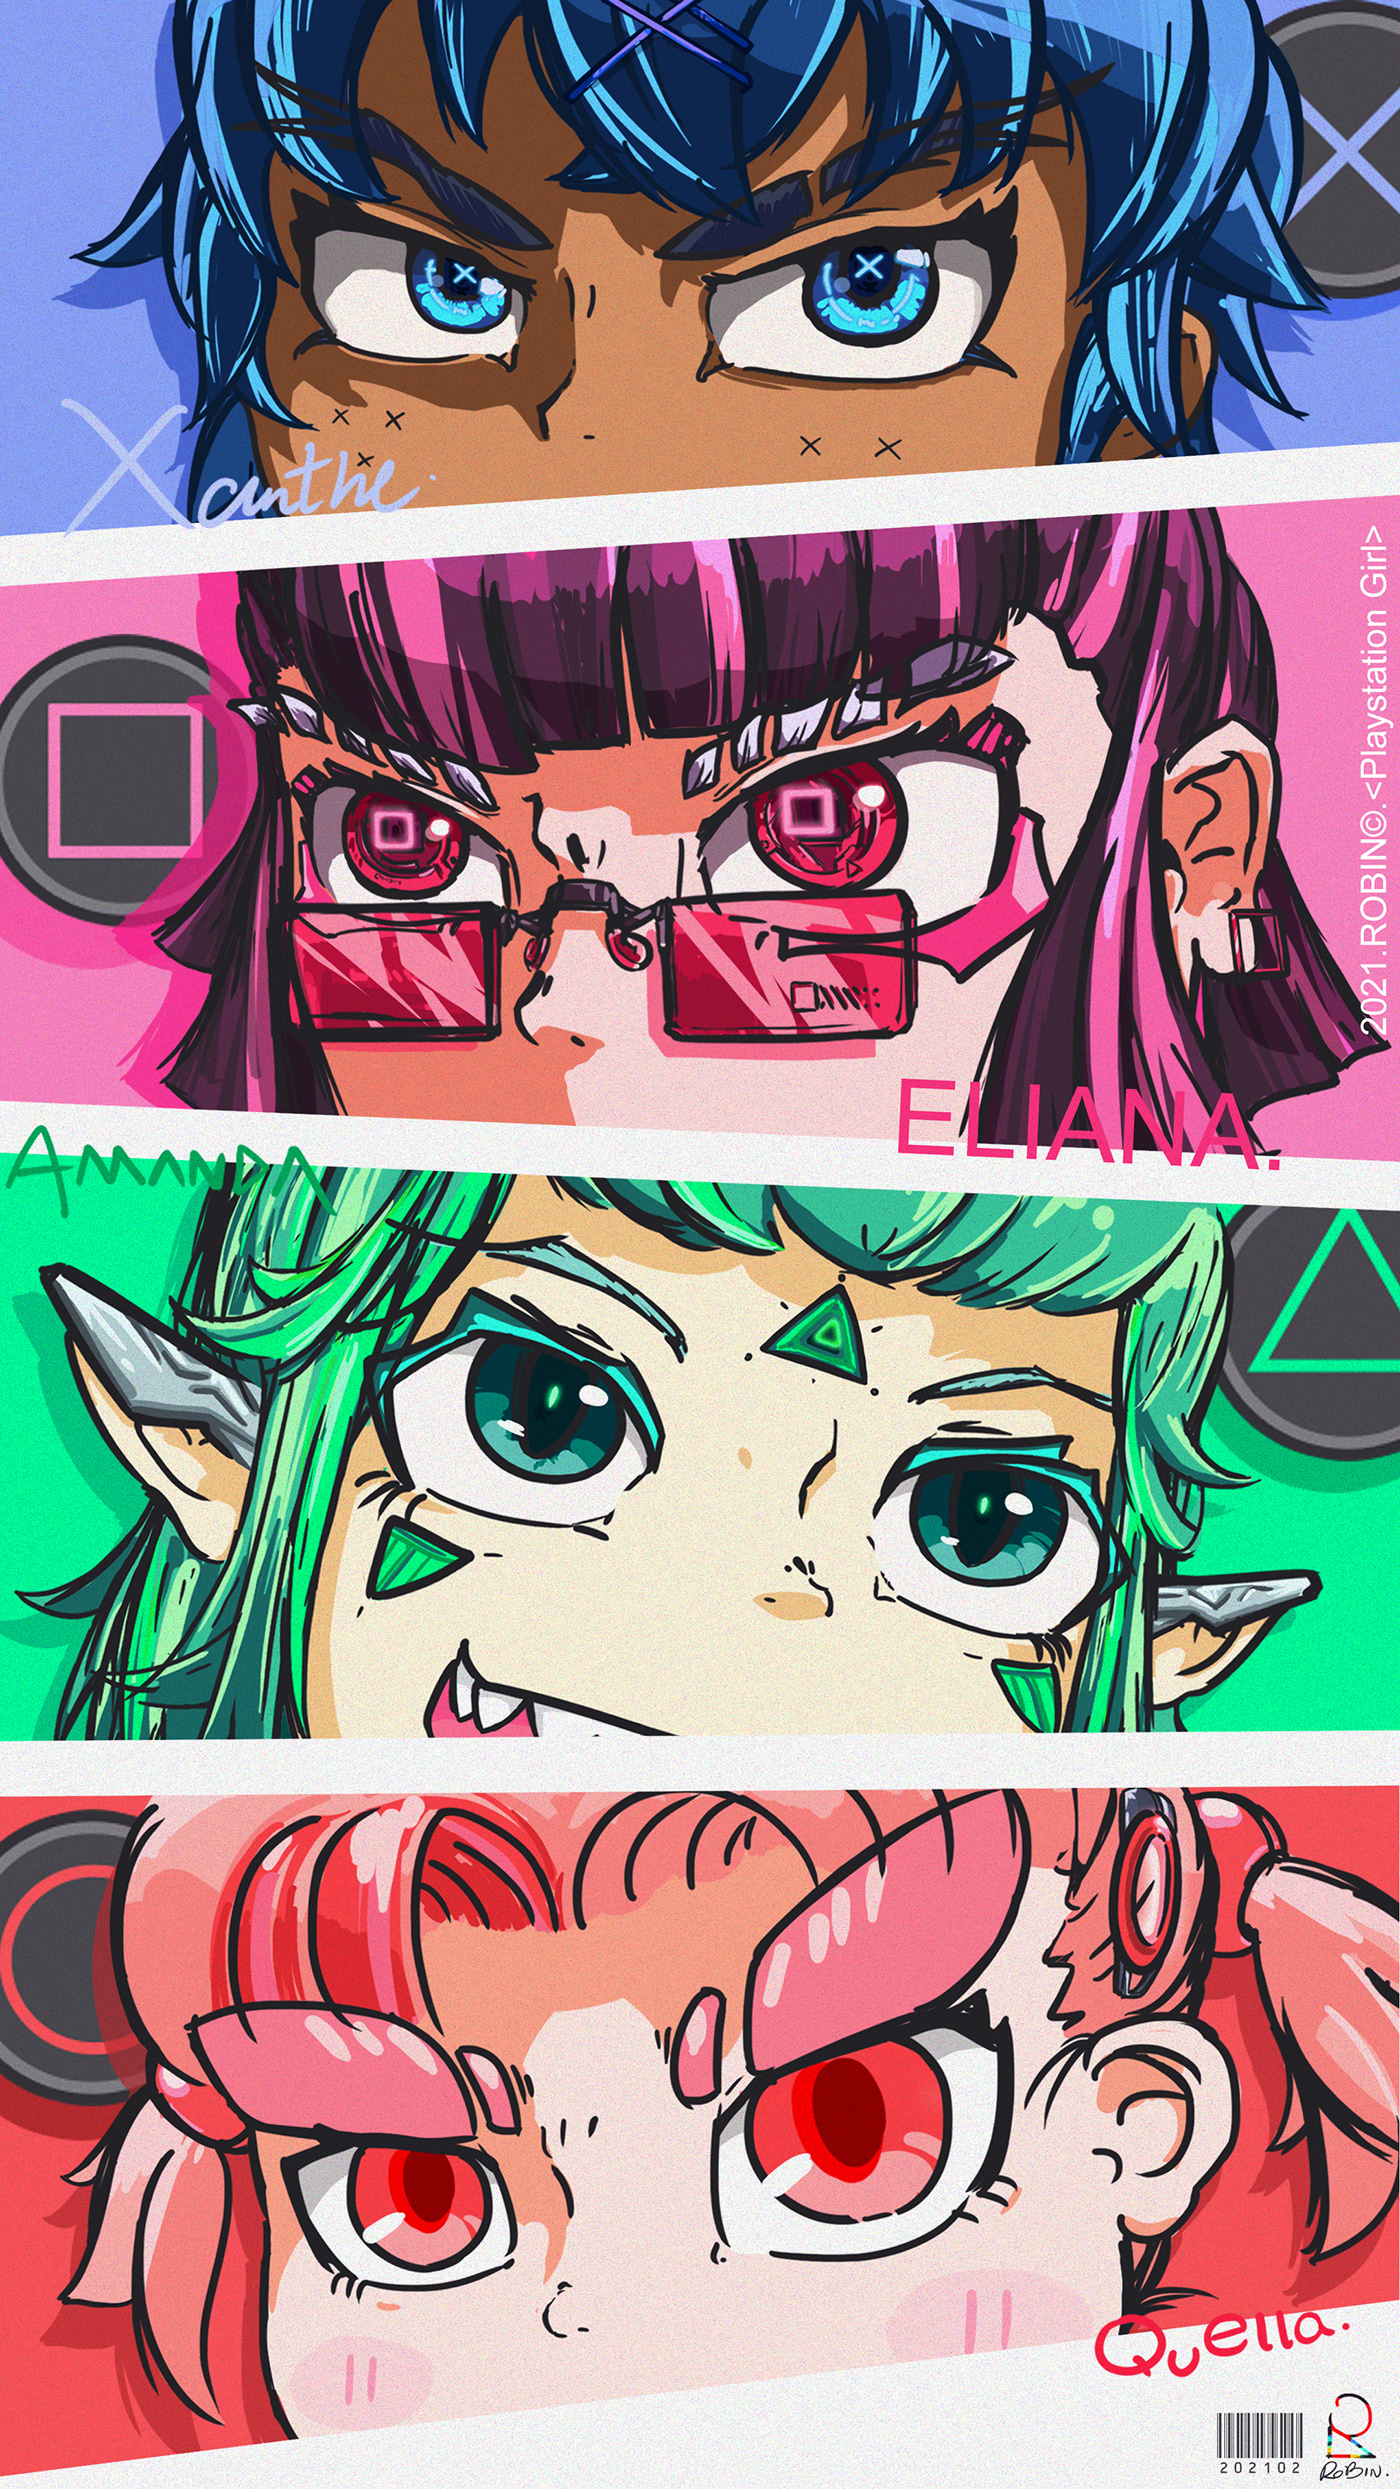 anime girl celluloid Character design  color scheme colorful digital painting eye gamepad head portrait playstation